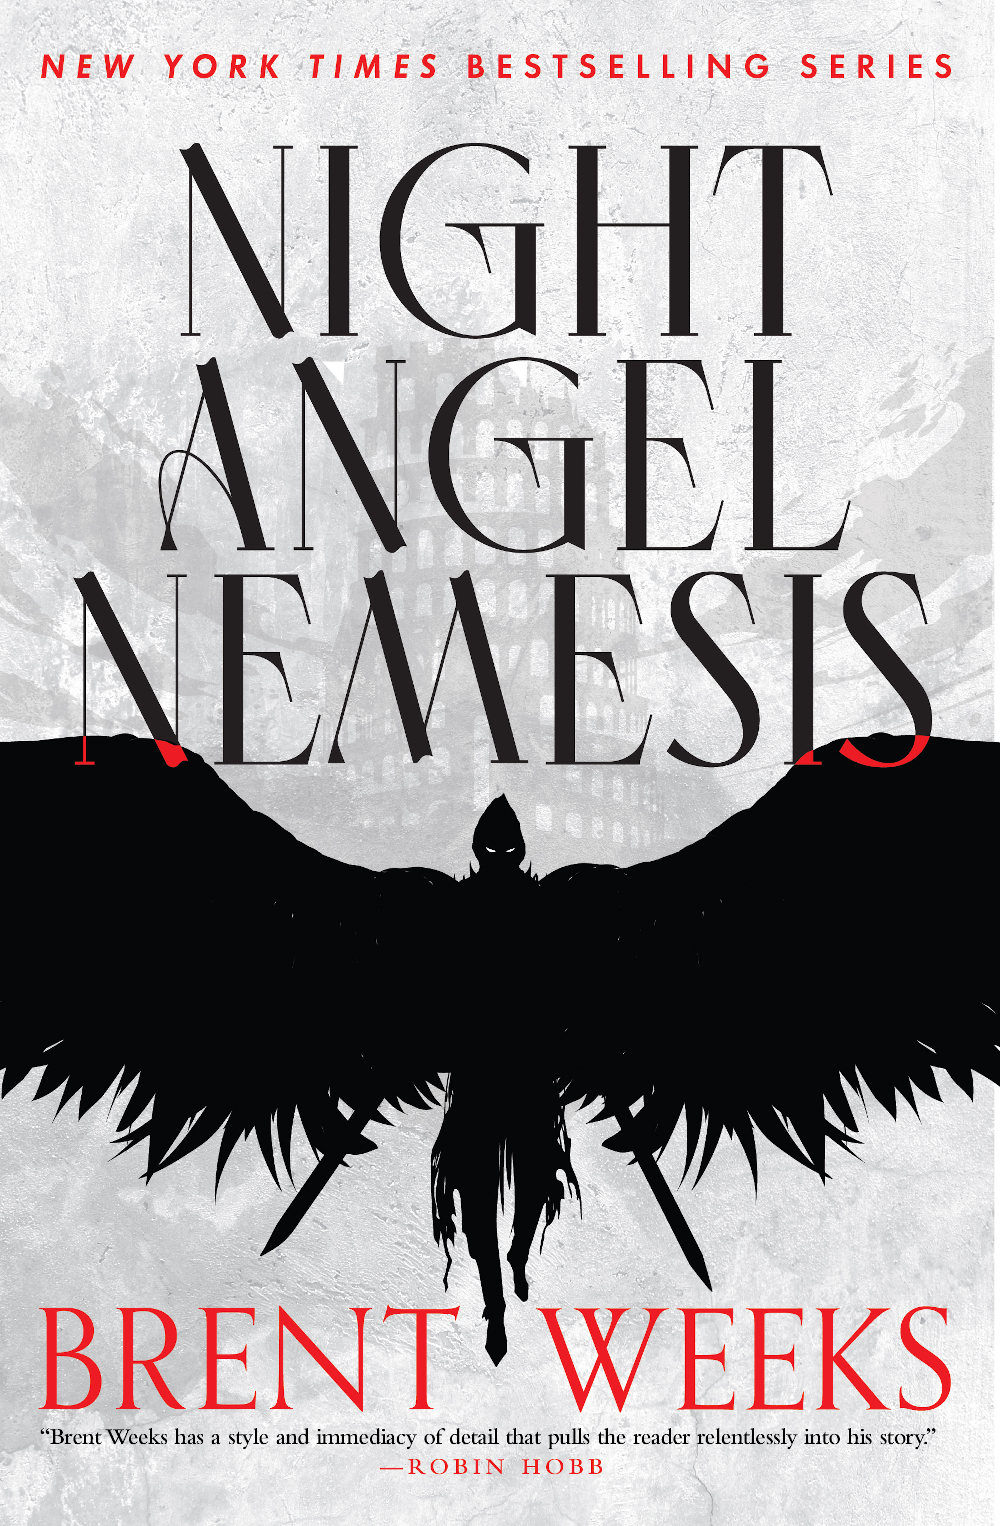 NIGHT ANGEL NEMESIS Extended Excerpt pic